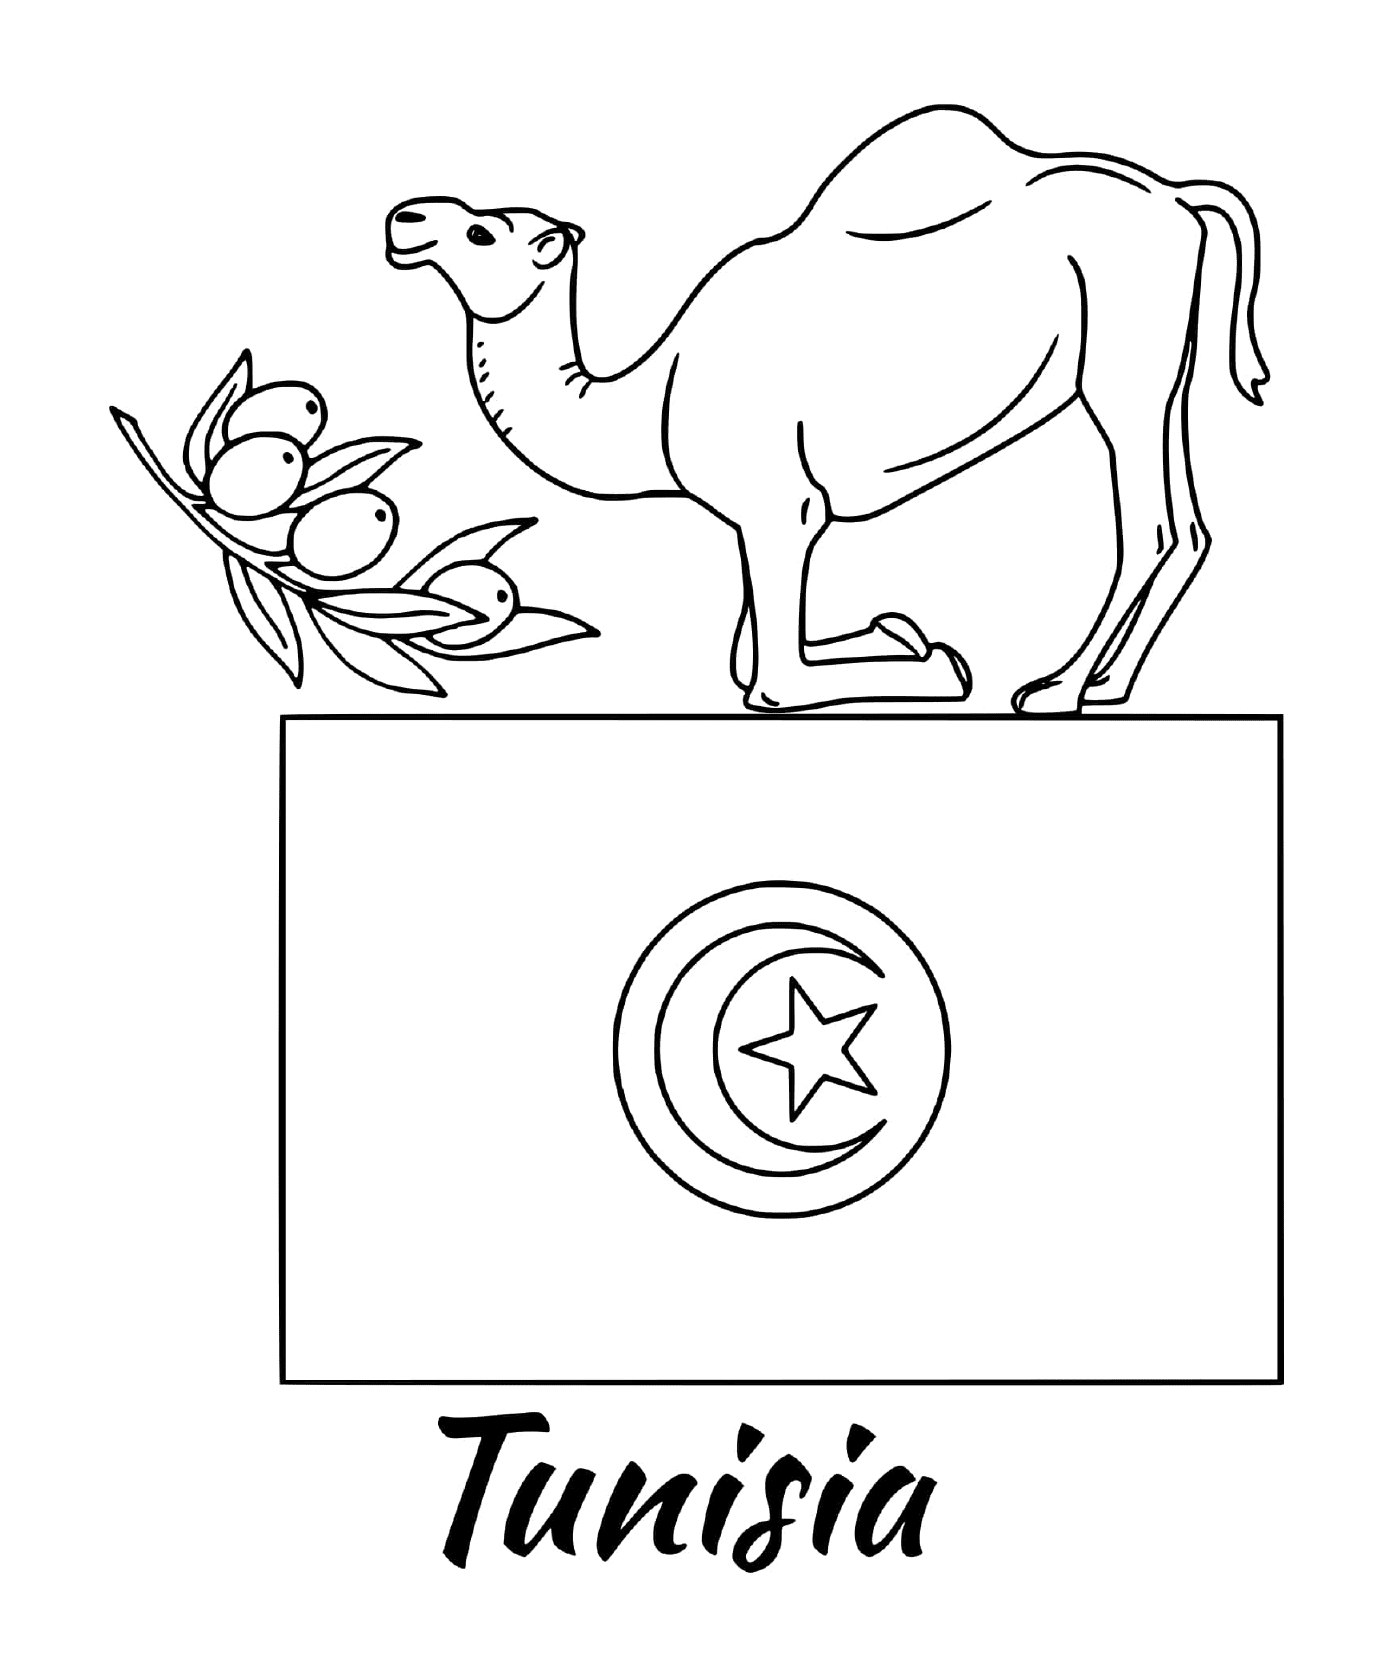  Flag of Tunisia with a camel 